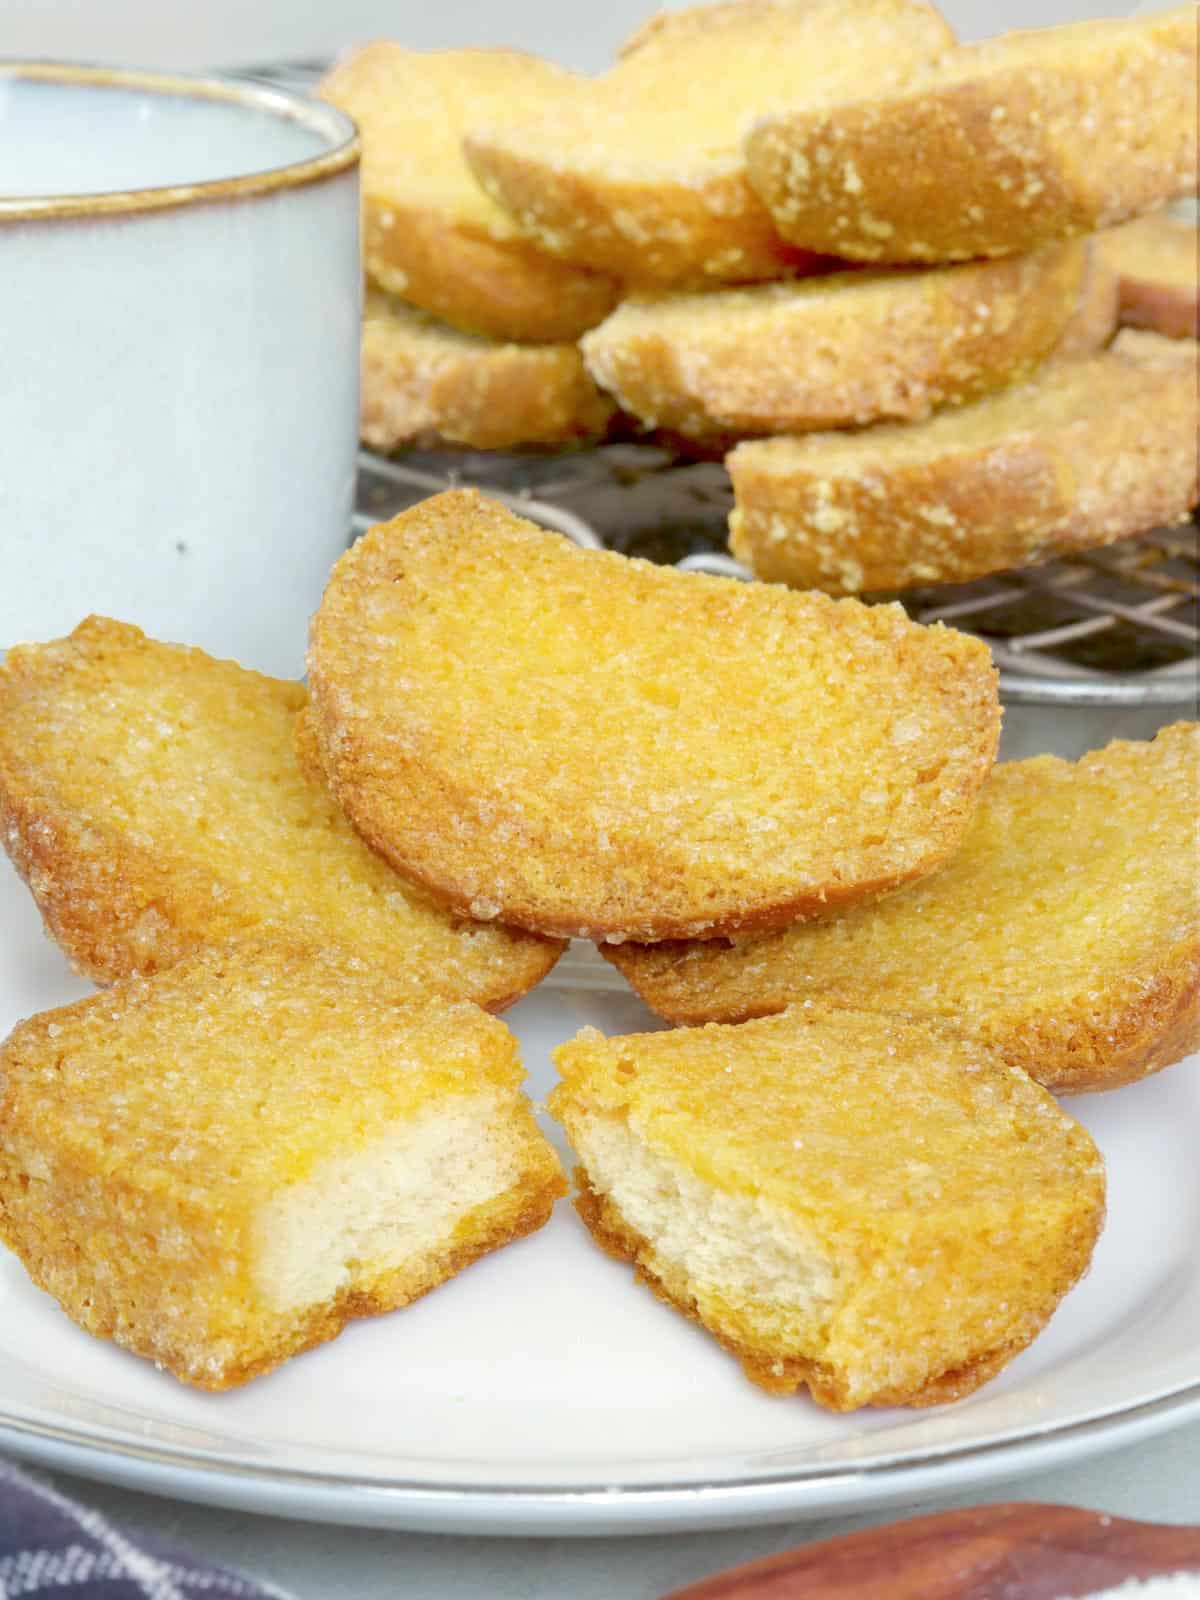 crispy, buttery biscocho on a plate